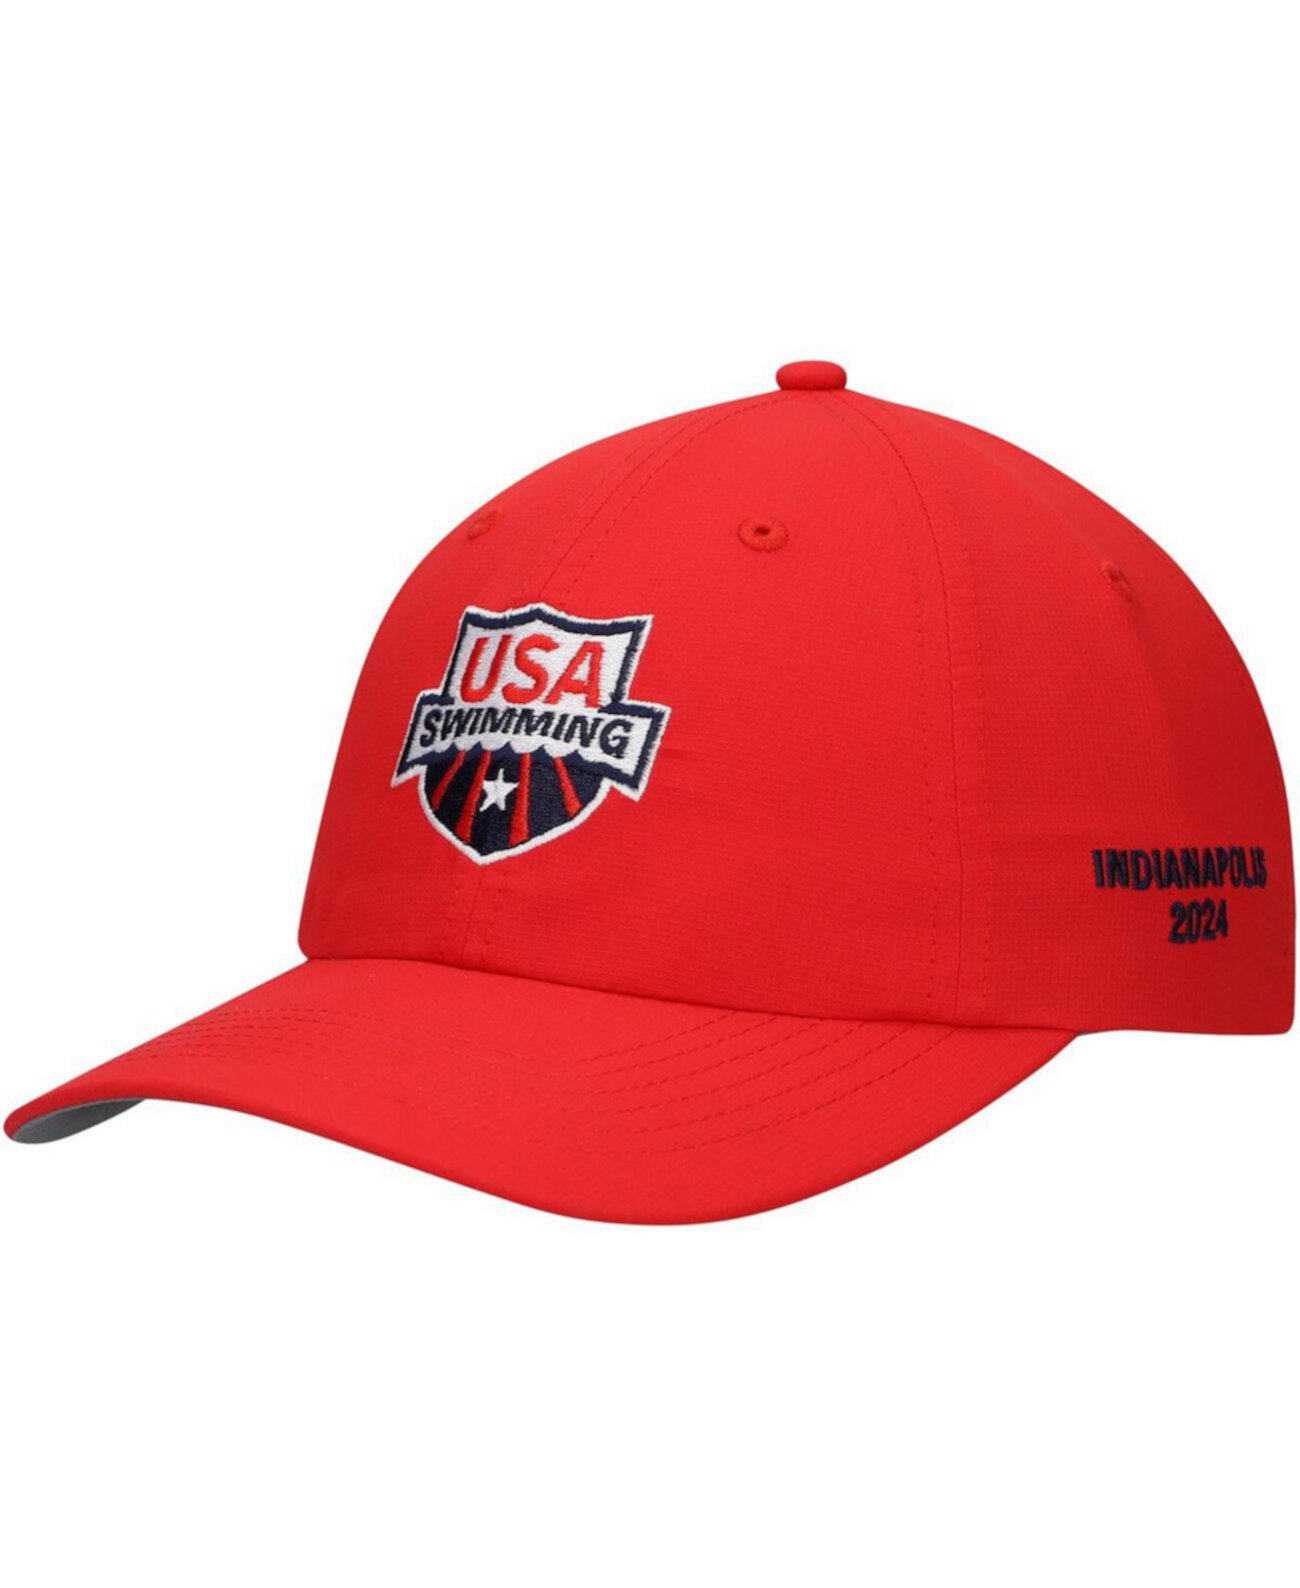 Men's Red USA Swimming 2024 Olympic Trials The Original Adjustable Hat Imperial